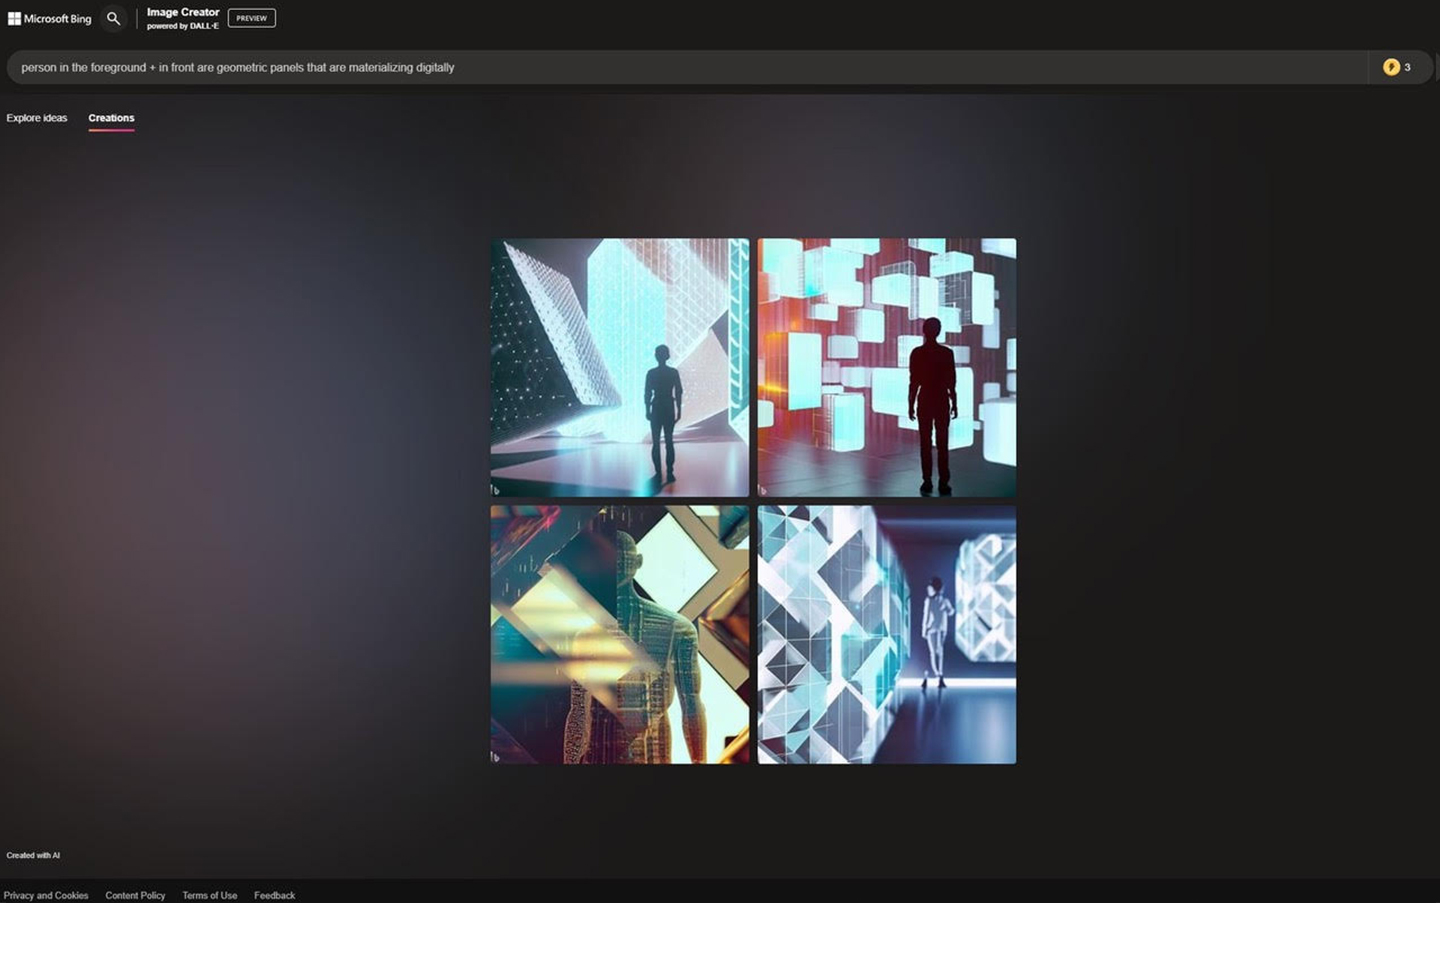 Screenshot of Bing Image Creator with the prompt 'Person in the foreground + in front are geometric panels that are materializing digitally'